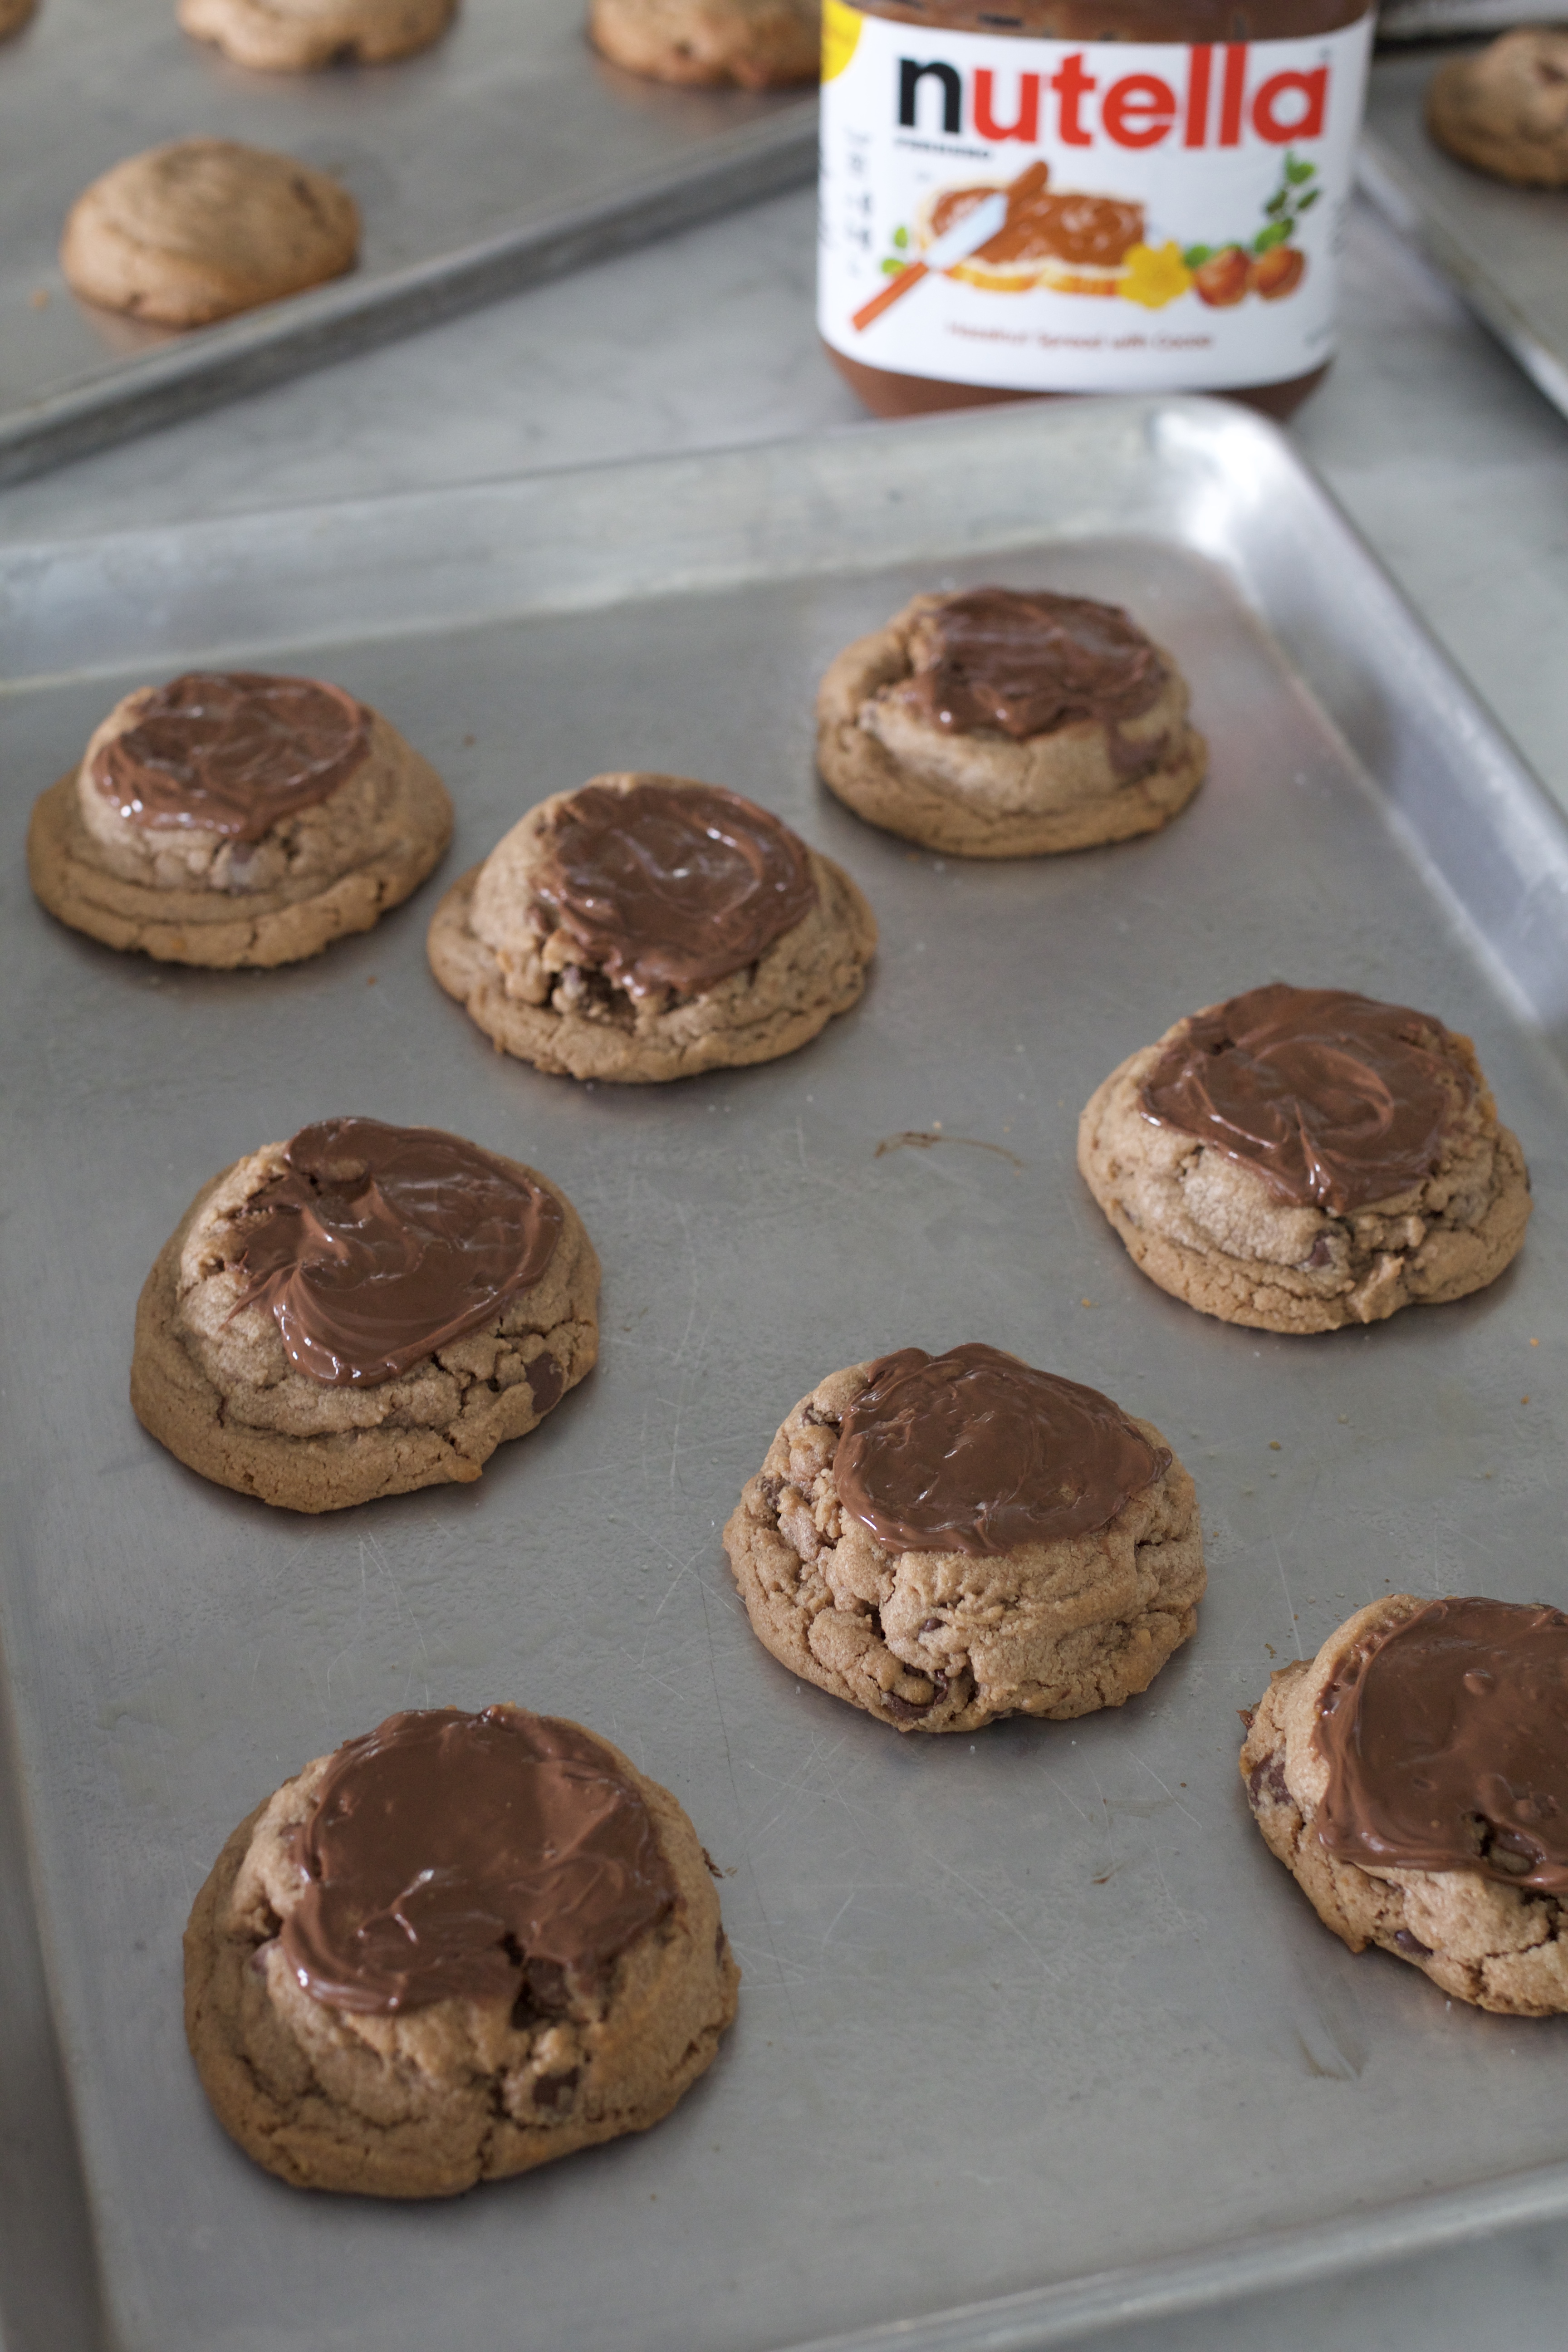 Frosted Nutella Chocolate Chip Cookies